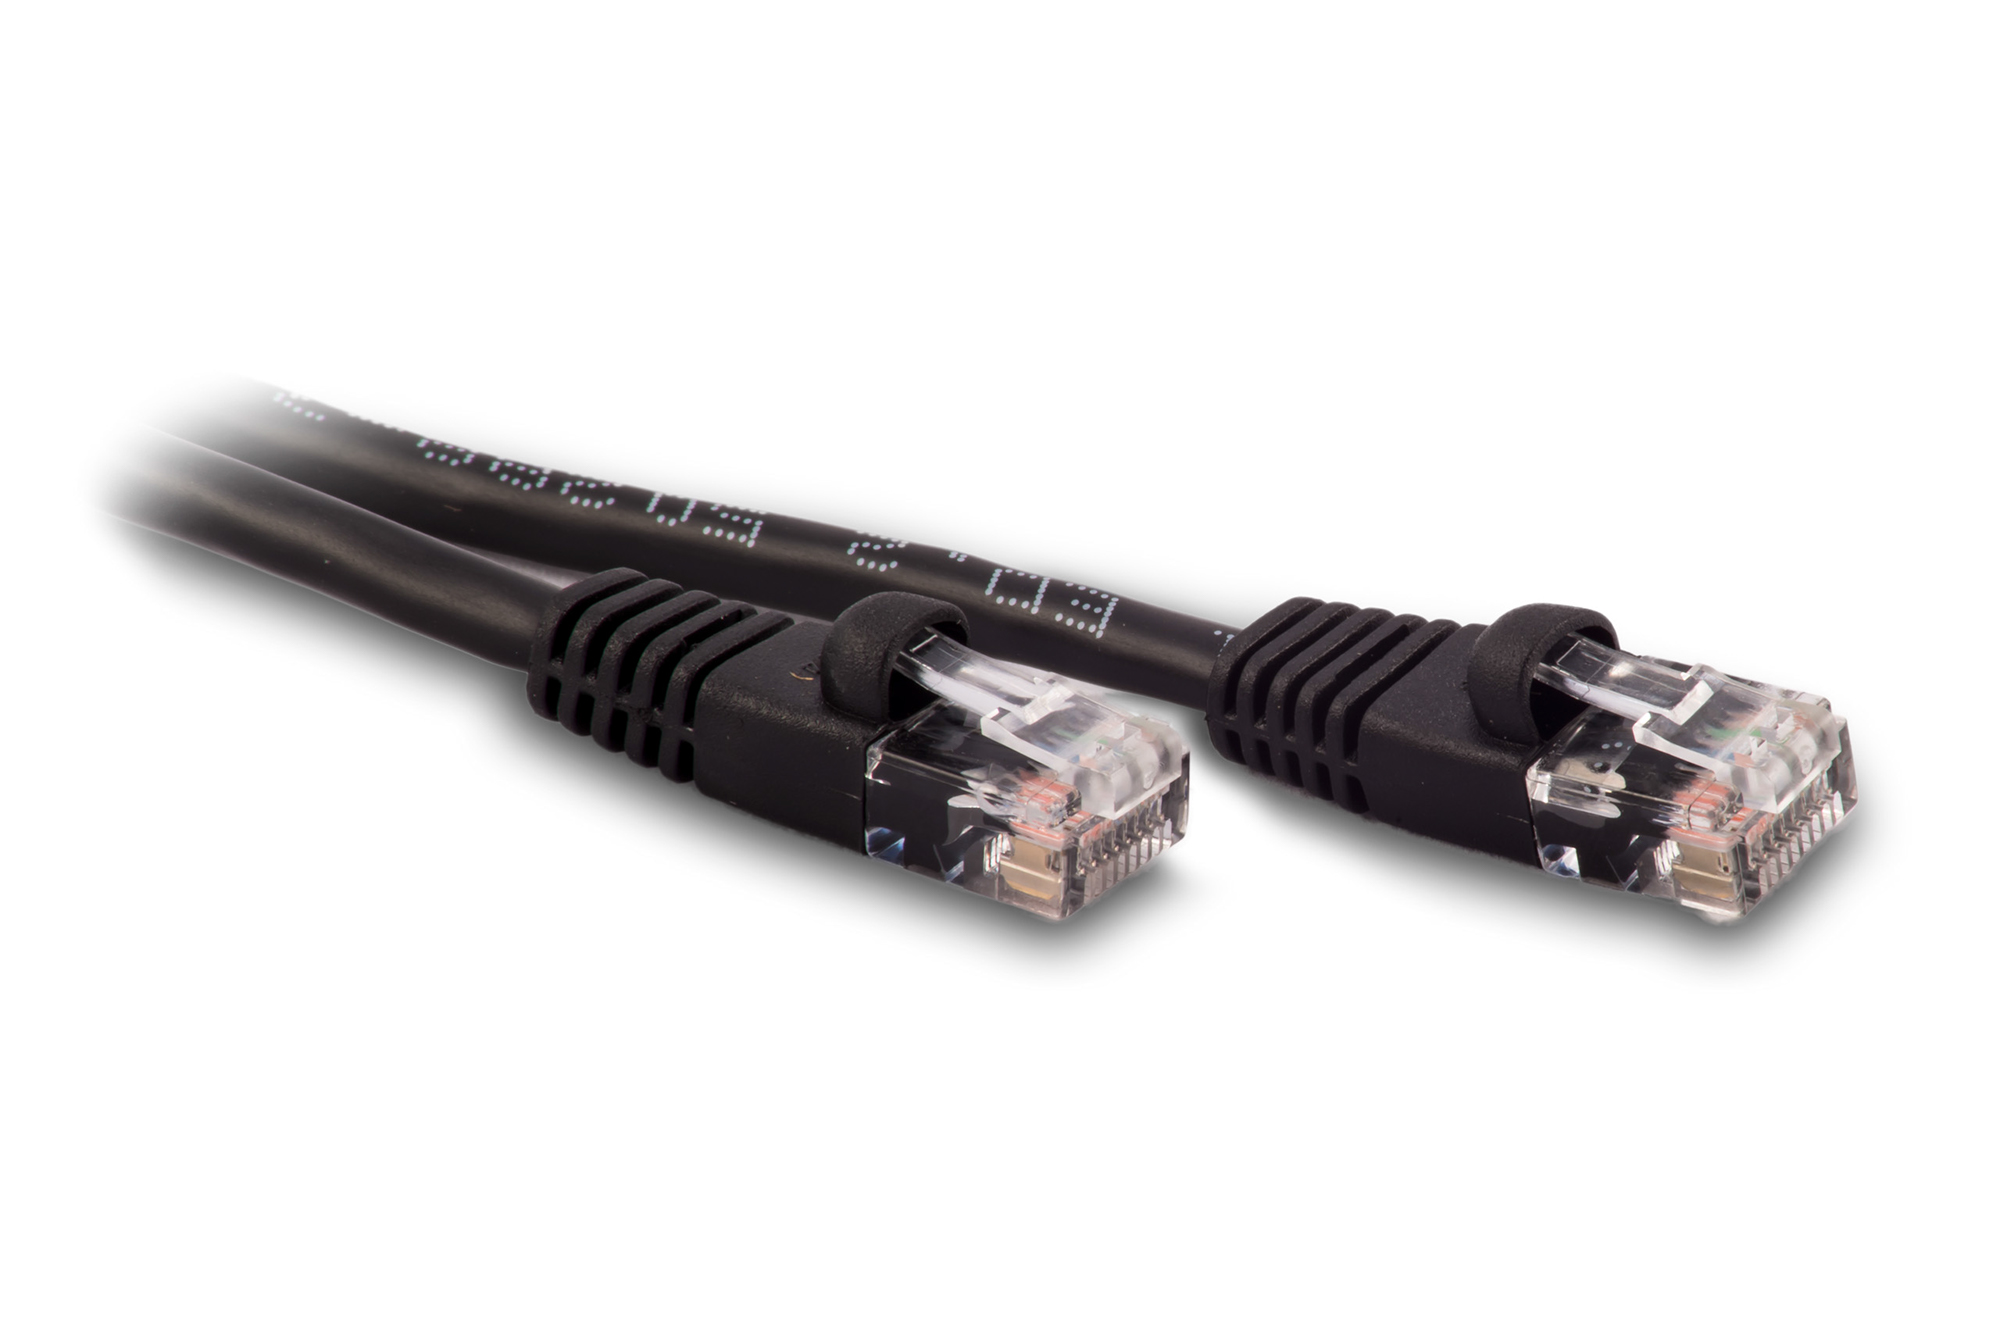 50ft Cat5e Ethernet Patch Cable - Black Color - Snagless Boot